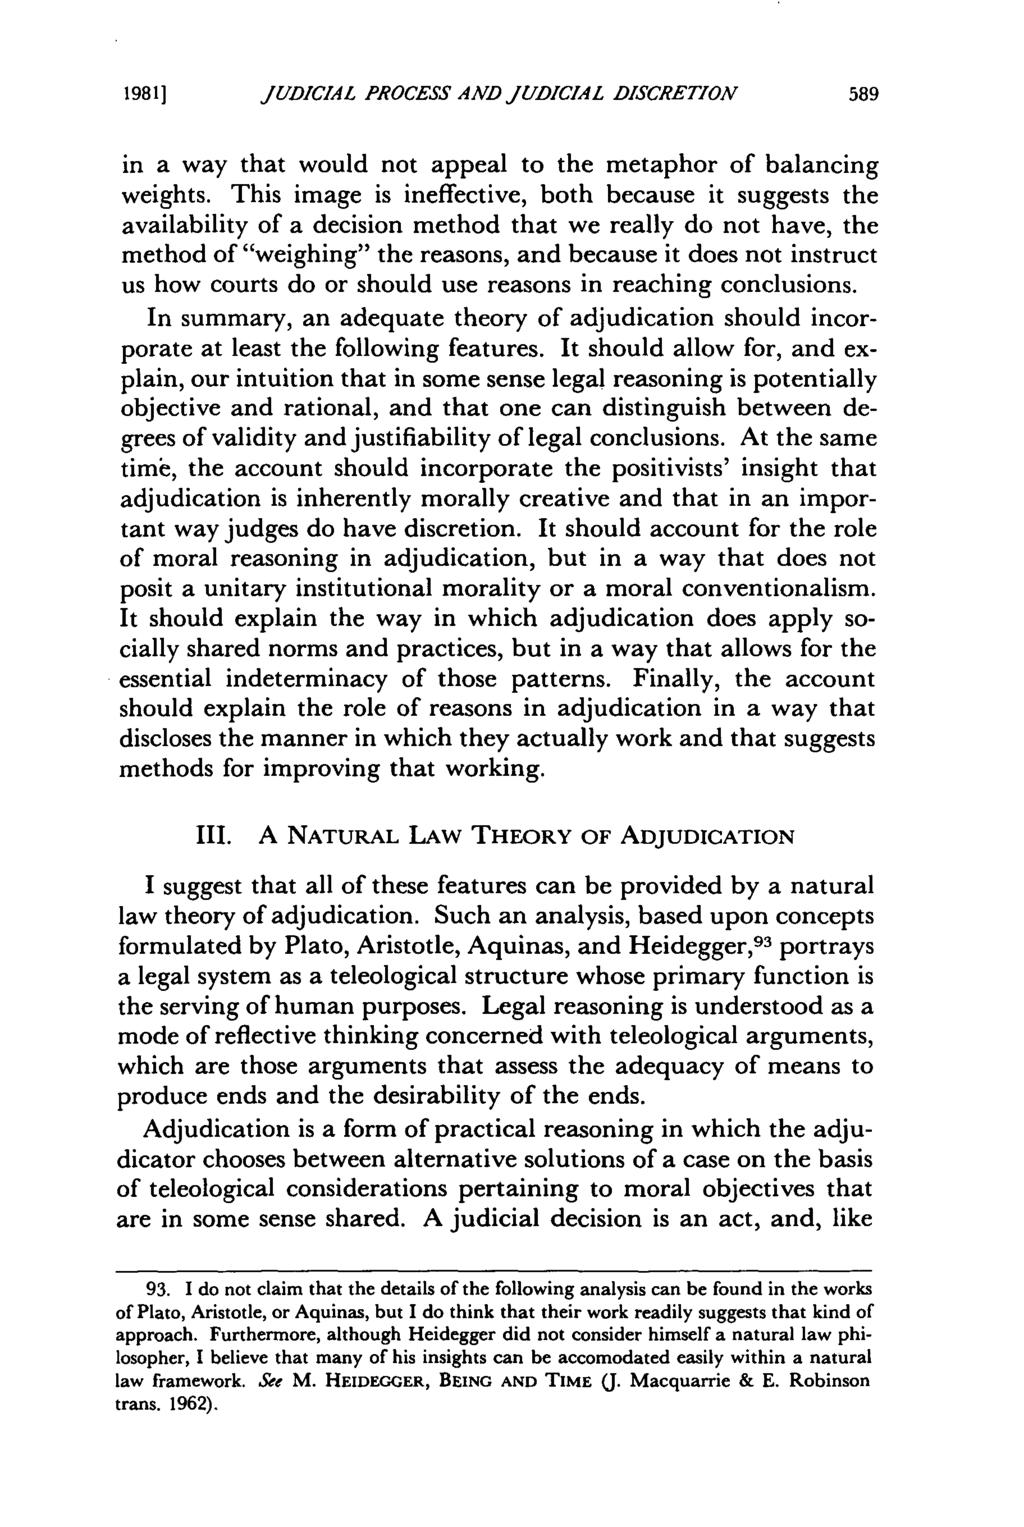 1981] Pannier: The Nature of the Judicial Process and Judicial Discretion JUDICIAL PROCESS AND JUDICIAL DISCRETION in a way that would not appeal to the metaphor of balancing weights.